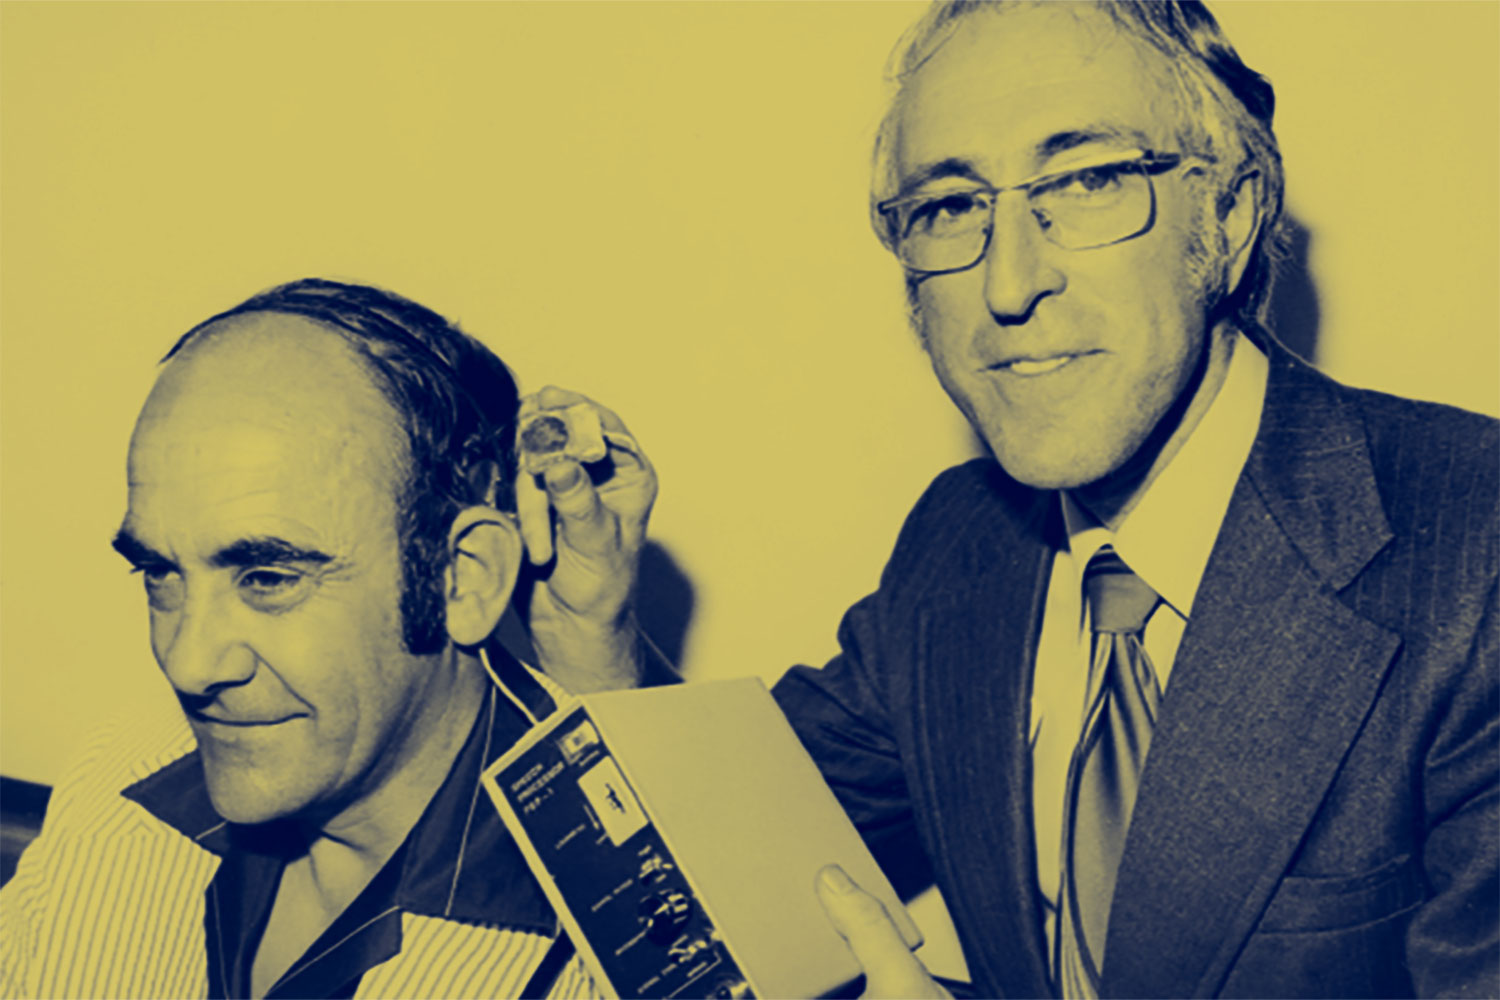 Graeme Clark and the first Cochlear implant recipient